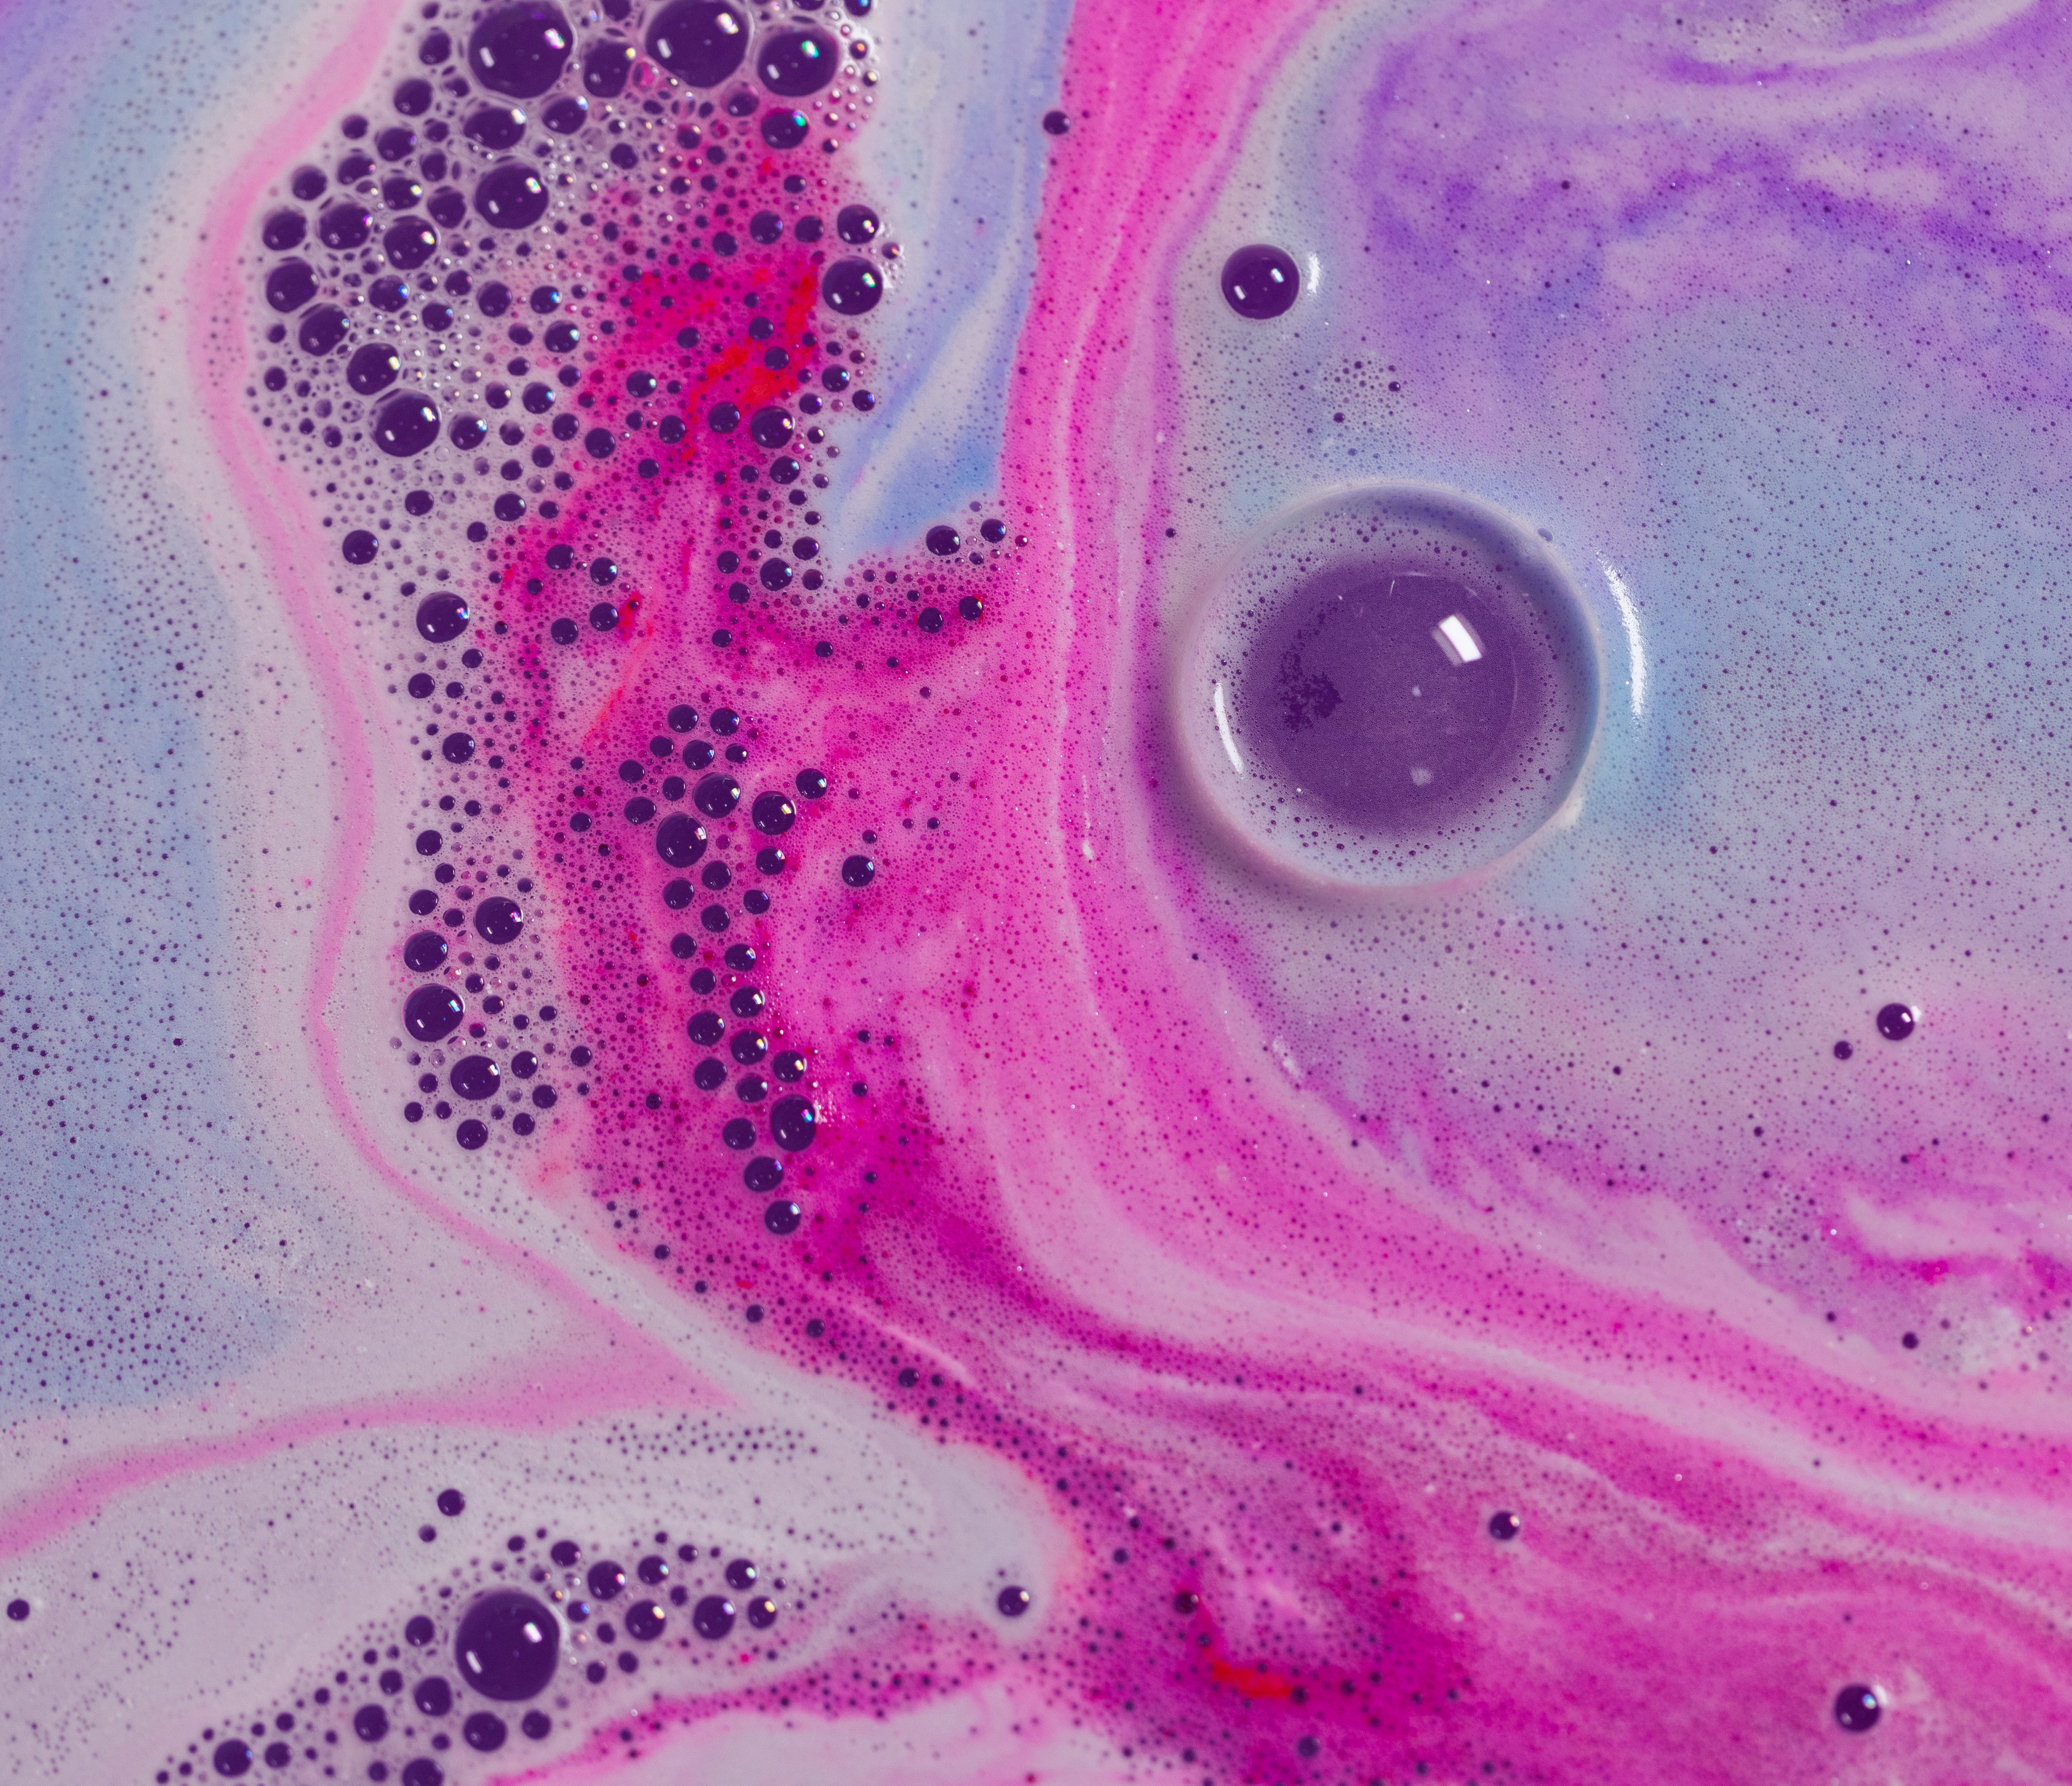 A close-up of colourful swirls of magical pink, blue and purple.